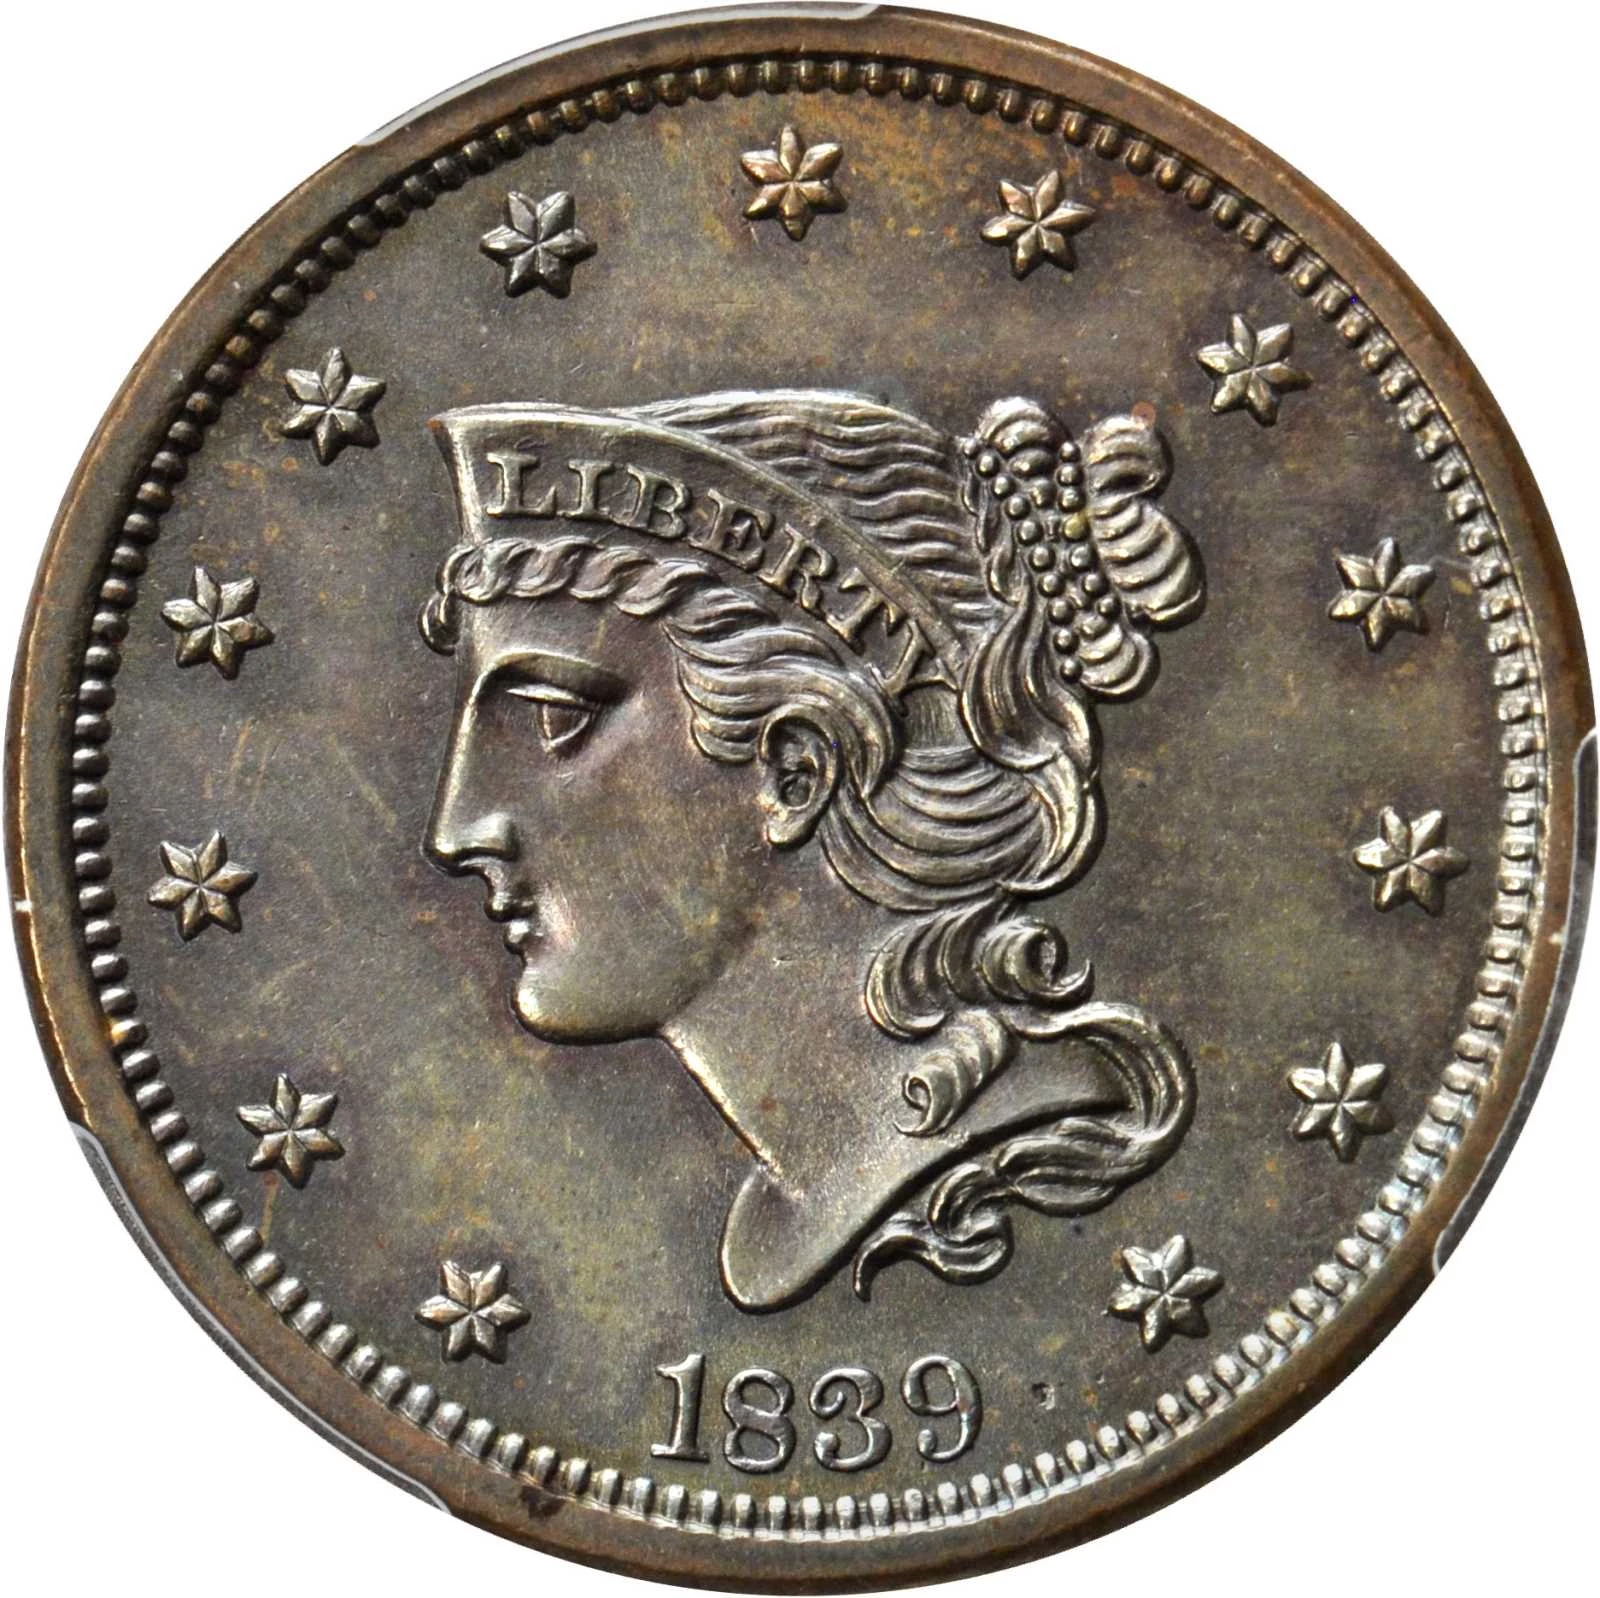 1858 Braided Hair Large Cent fantasy issue, high grade